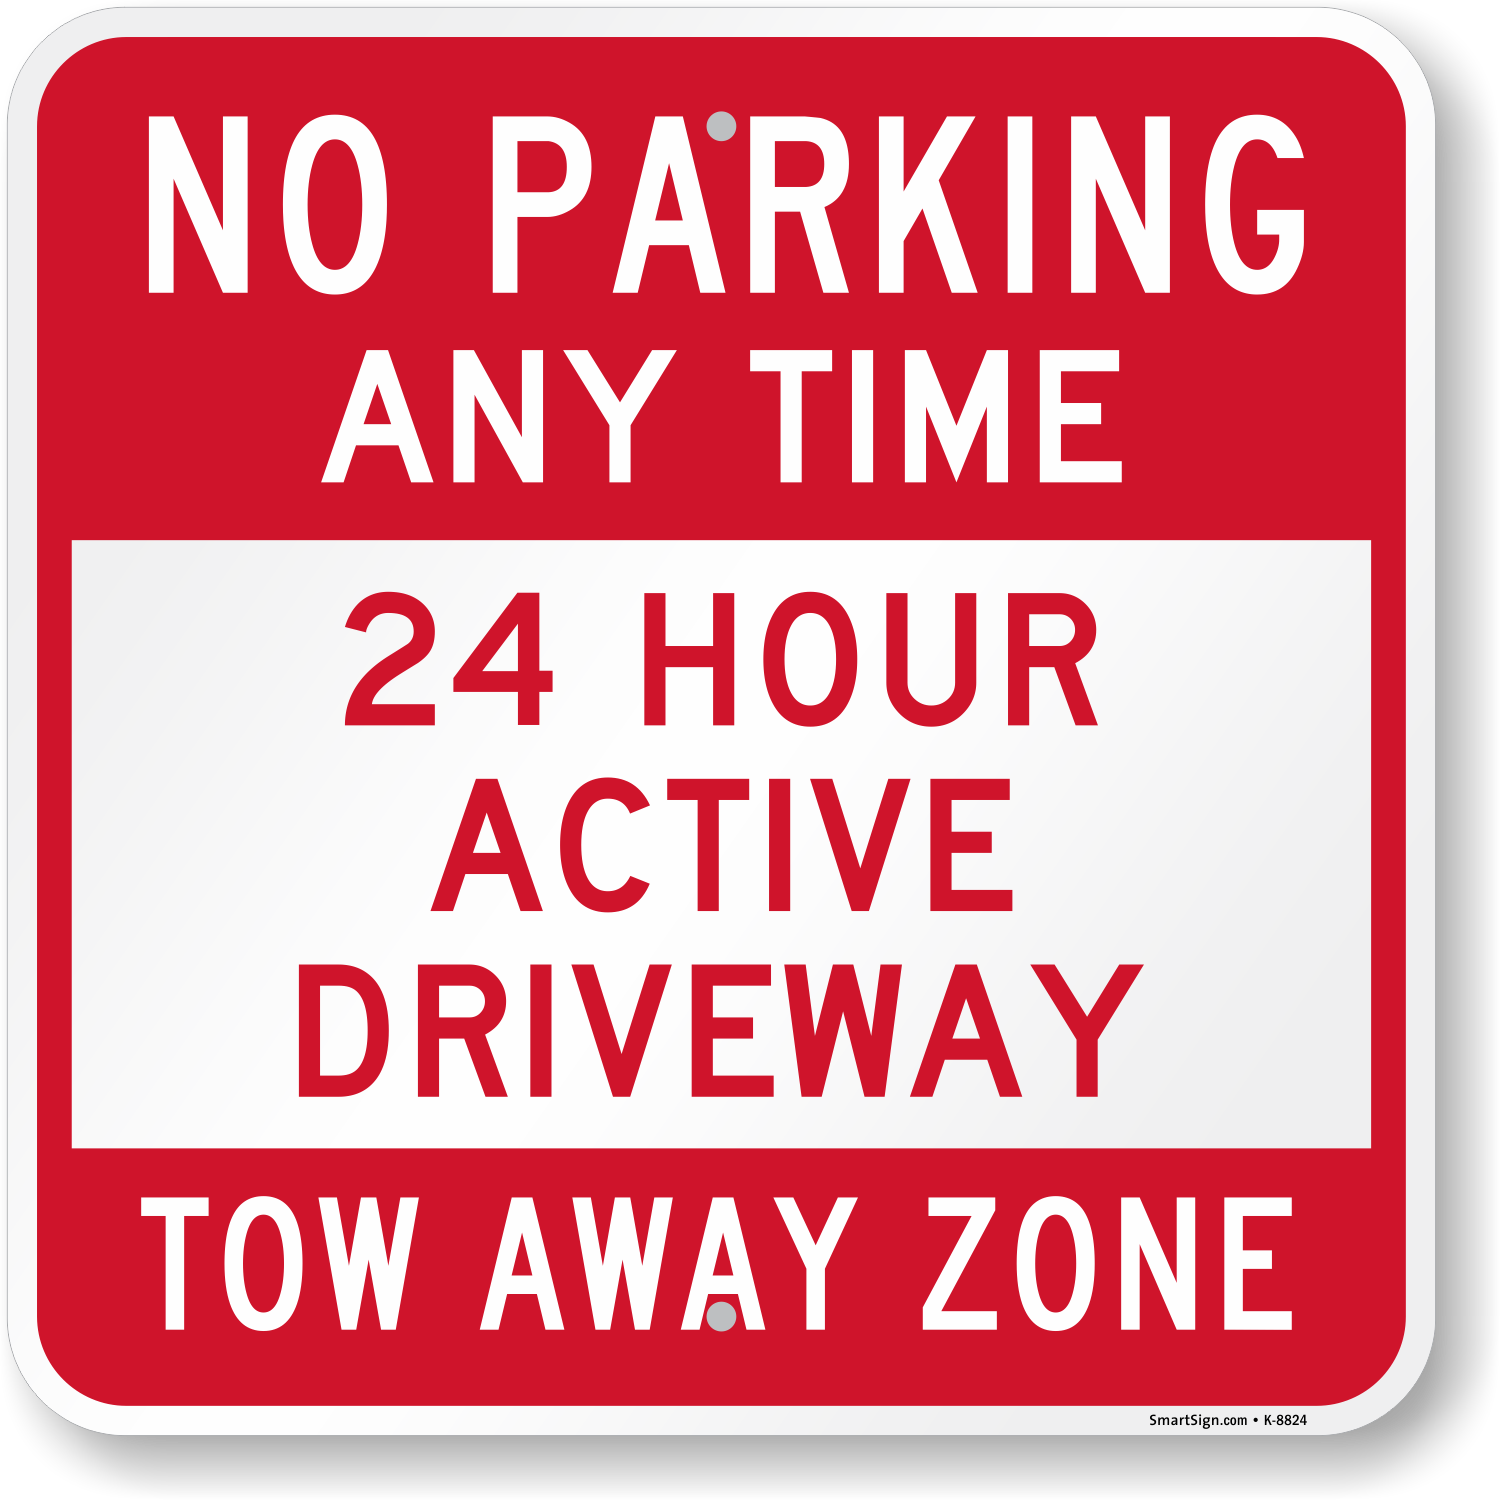 18 x 24 Heavy-Gauge Aluminum Rust Proof Parking Sign Made in The USA No Parking On The Grass Protect Your Business & Municipality 